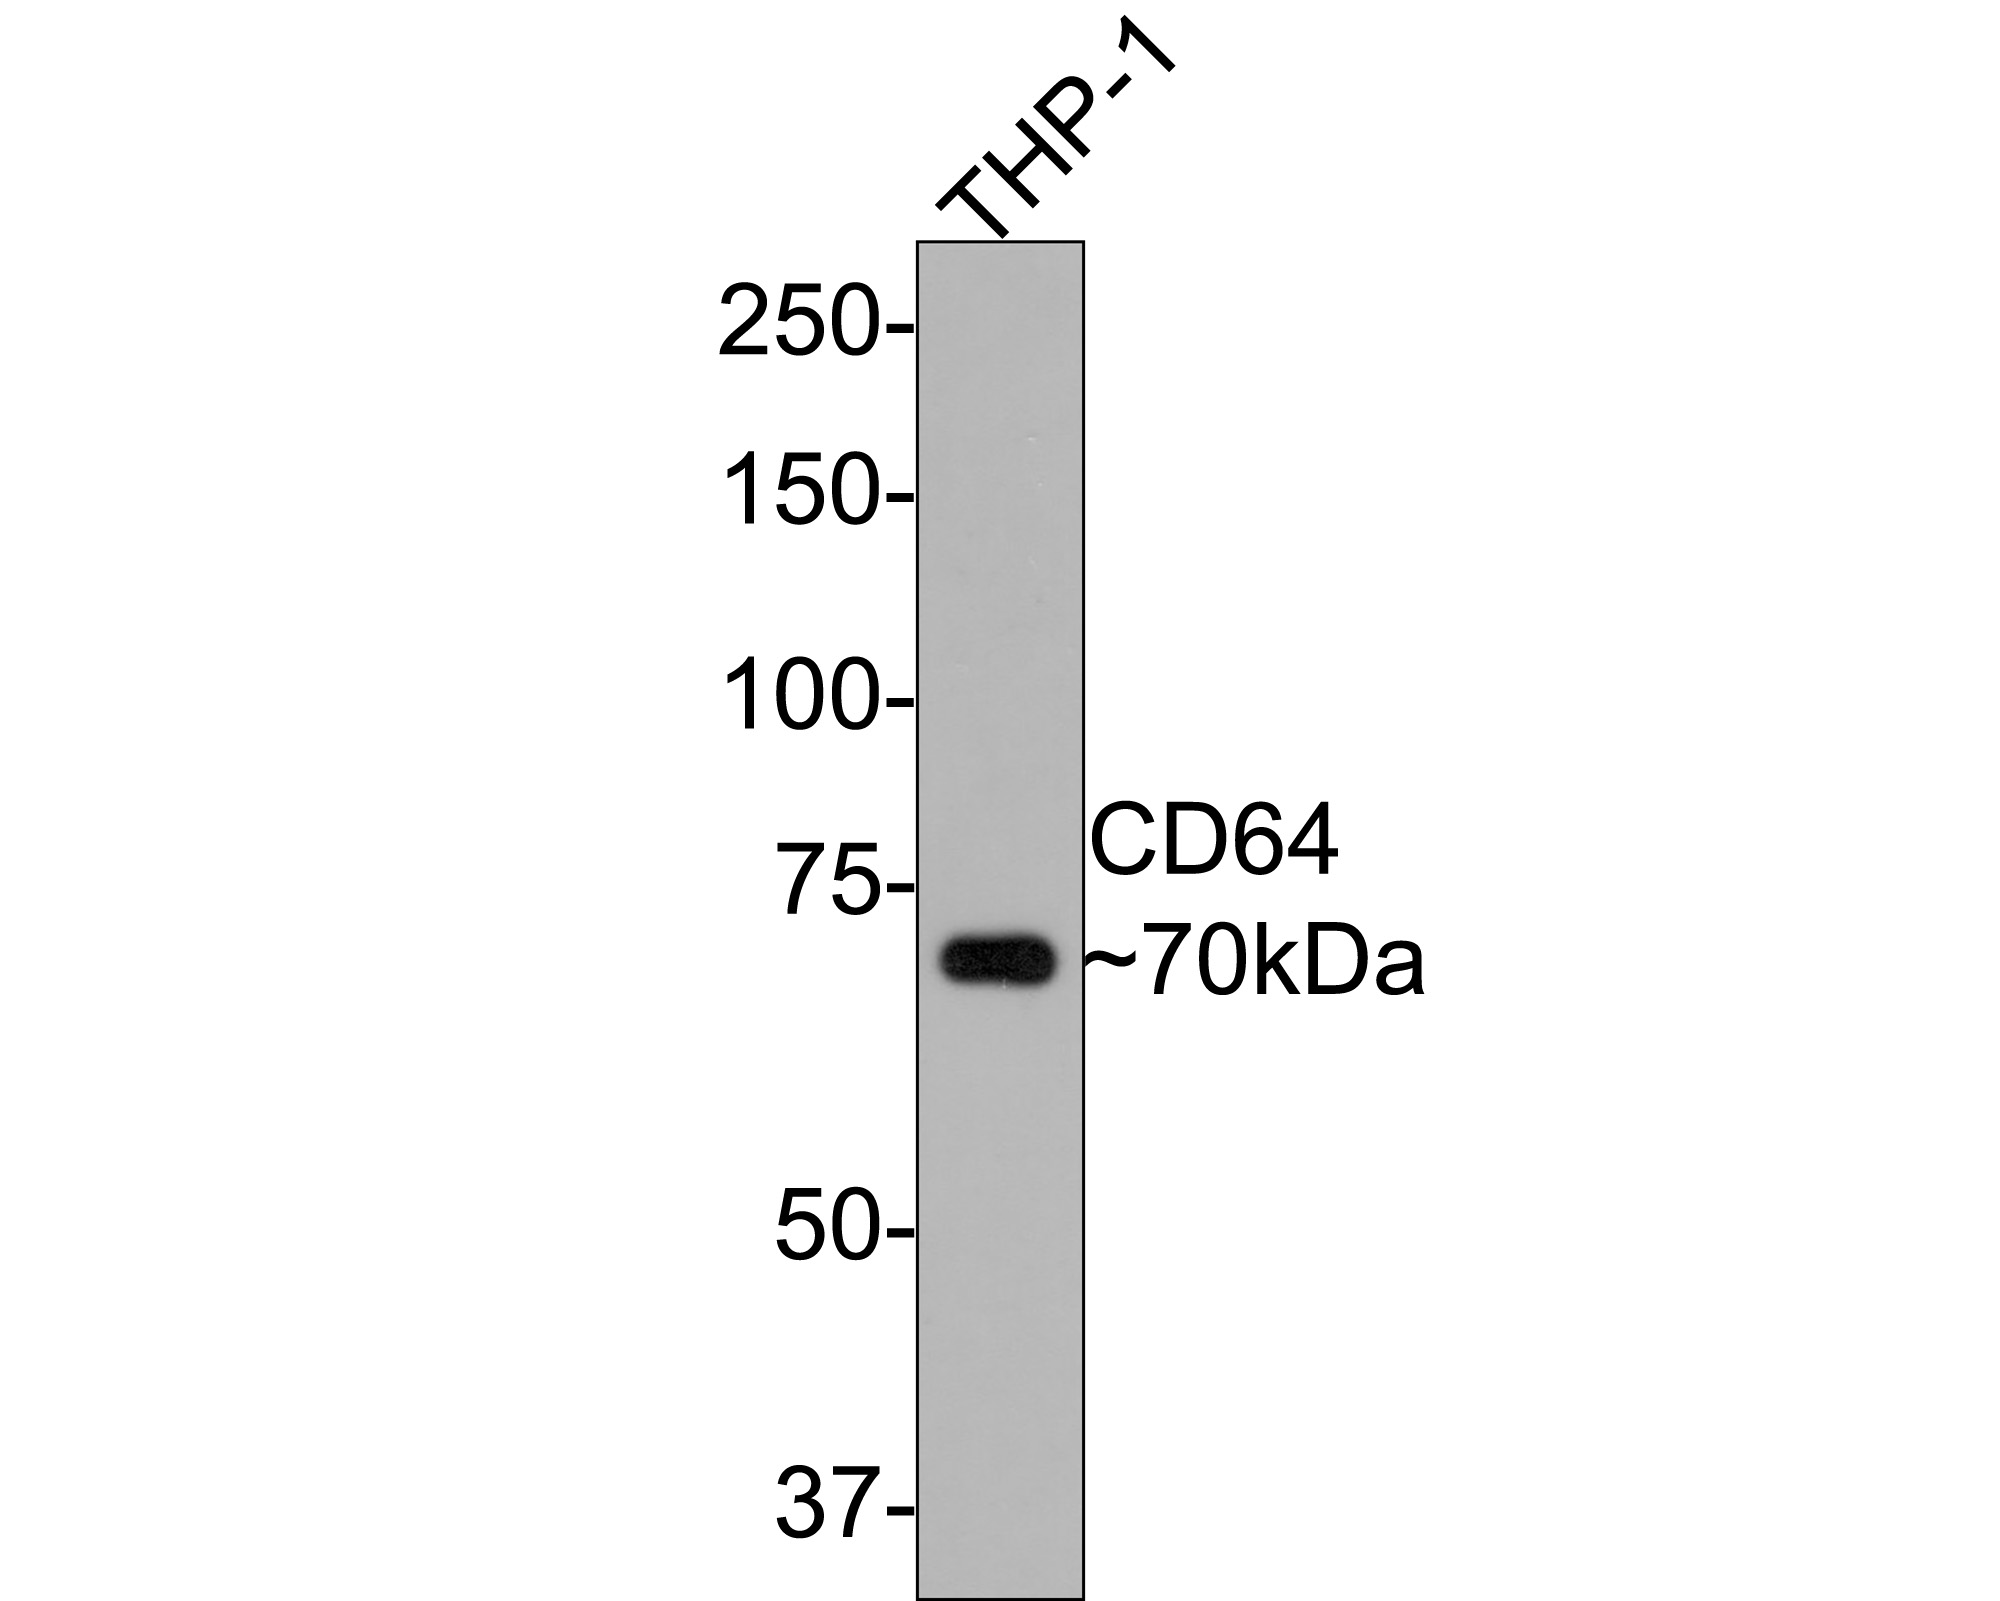 Western blot analysis of CD64 on THP-1 cell lysates with Mouse anti-CD64 antibody (HA601003) at 1/2,000 dilution.<br />
<br />
Lysates/proteins at 10 µg/Lane.<br />
<br />
Predicted band size: 43 kDa<br />
Observed band size: 70 kDa<br />
<br />
Exposure time: 1 minute;<br />
<br />
8% SDS-PAGE gel.<br />
<br />
Proteins were transferred to a PVDF membrane and blocked with 5% NFDM/TBST for 1 hour at room temperature. The primary antibody (HA601003) at 1/2,000 dilution was used in 5% NFDM/TBST at room temperature for 2 hours. Goat Anti-Mouse IgG - HRP Secondary Antibody (HA1006) at 1:100,000 dilution was used for 1 hour at room temperature.